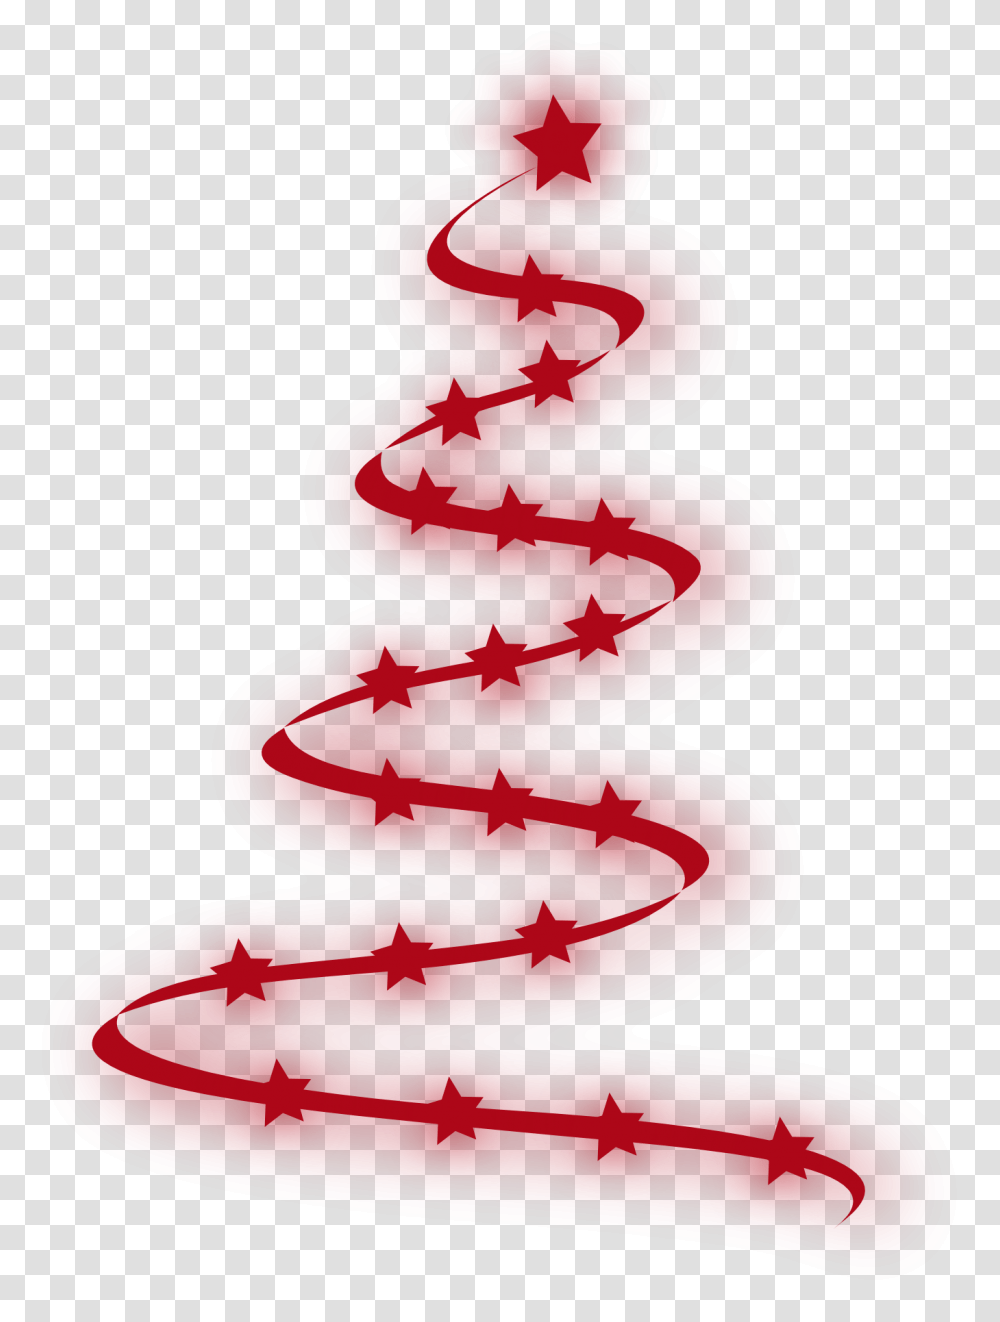 Christmas Tree Related Wallpapers Background Images And Clip Art Red Christmas Tree, Text, Alphabet, Heart, Wedding Cake Transparent Png